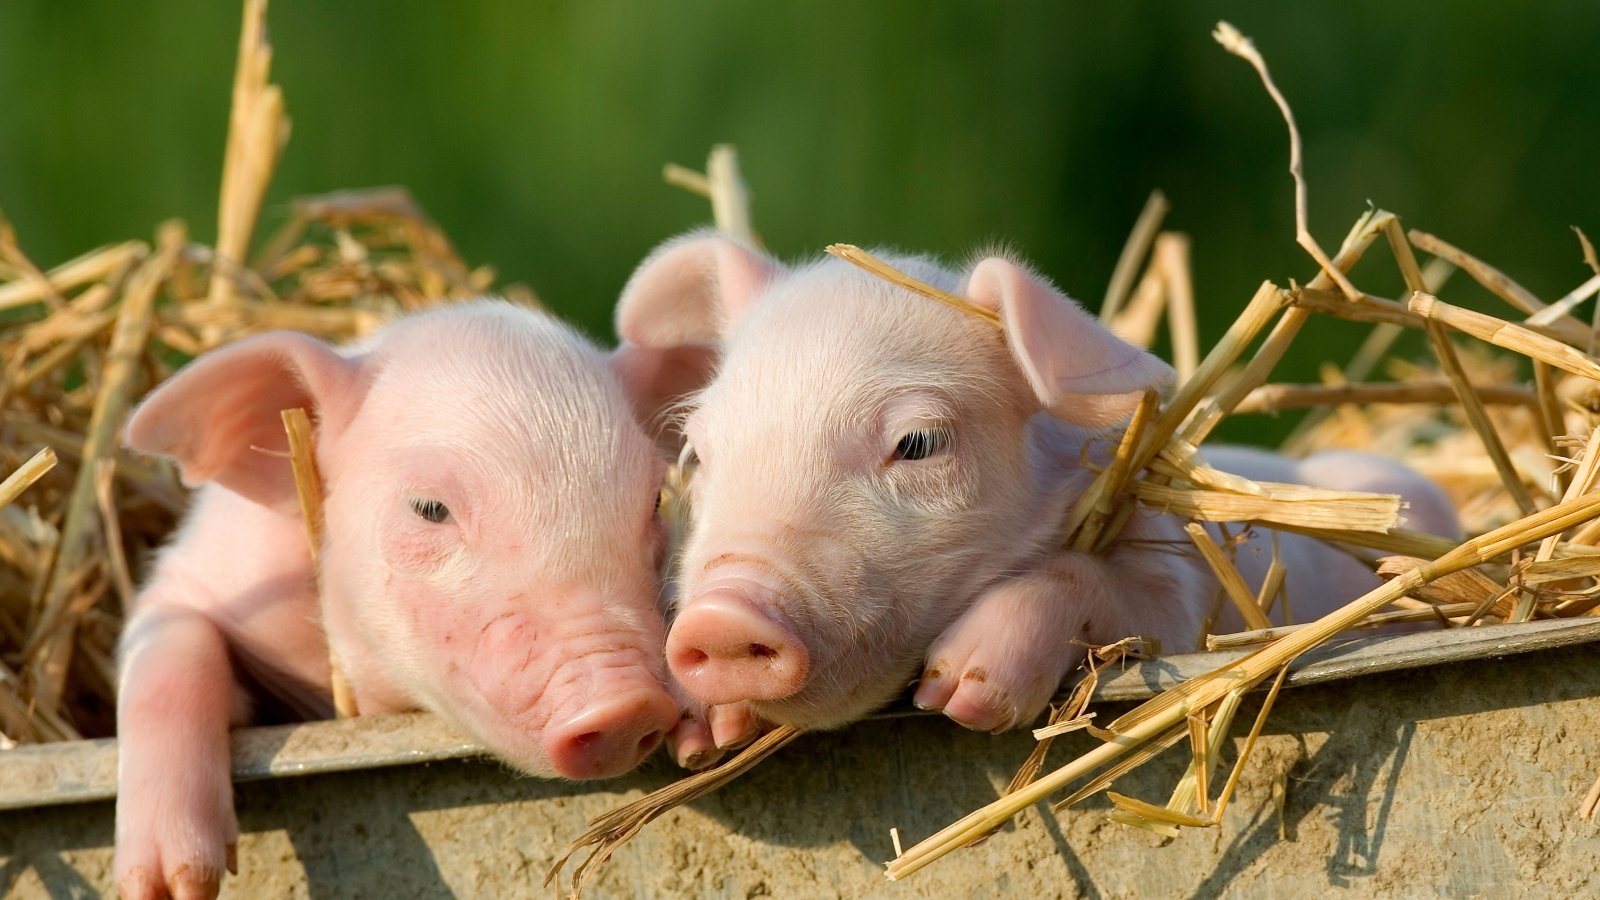 two small baby piglets surrounded by straw